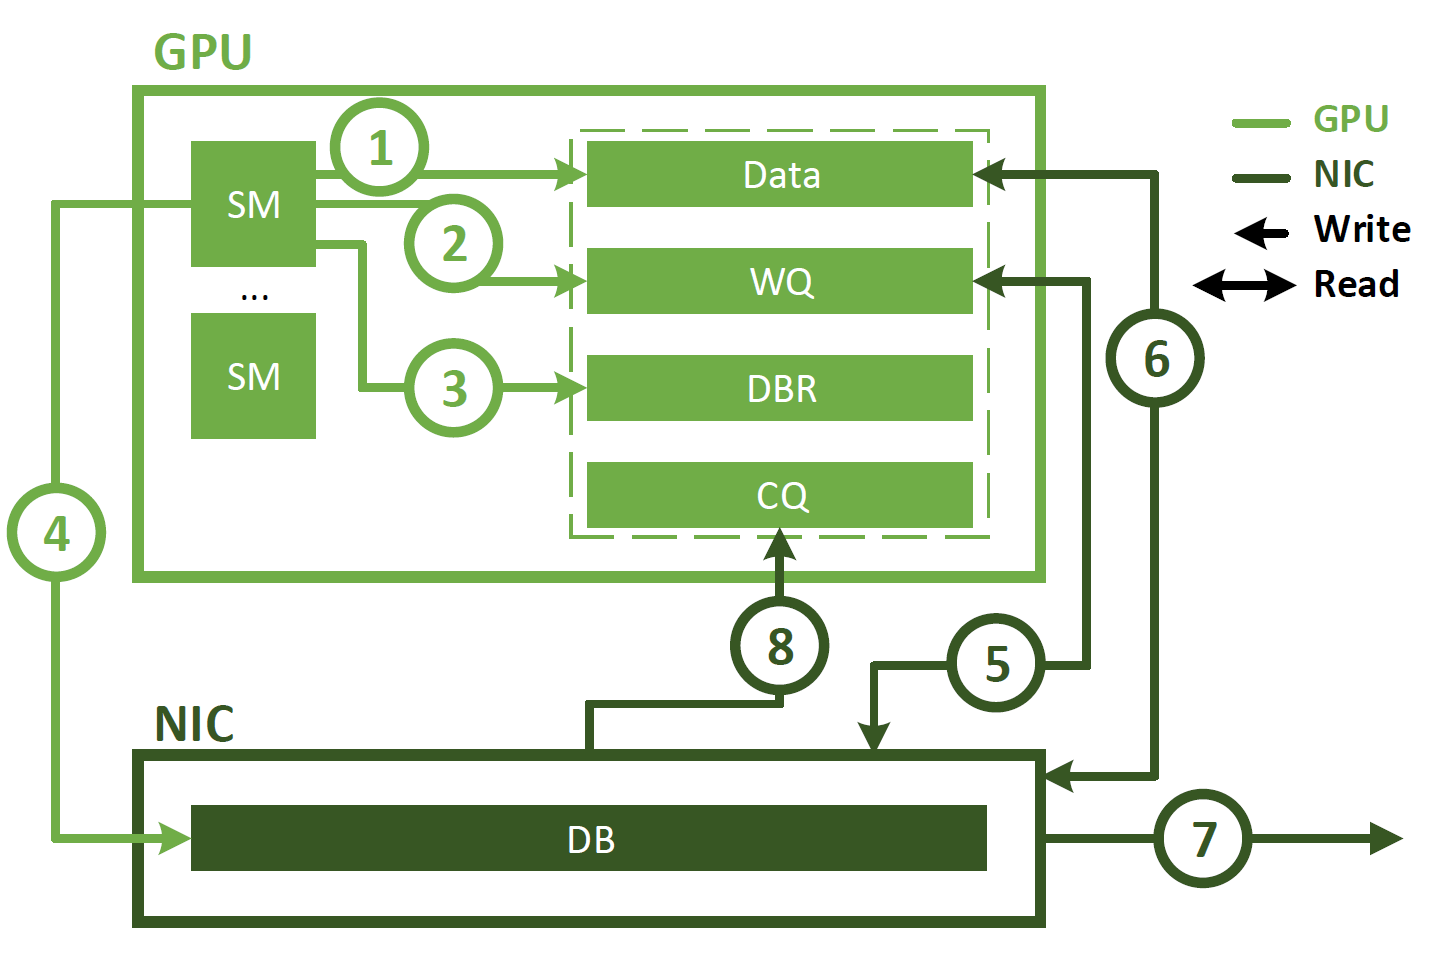 Control flow diagram shows two components: GPU and NIC, and how a GPU SM submits work descriptors to the NIC. The control flow arrows are marked with numbers, which are described in this section.